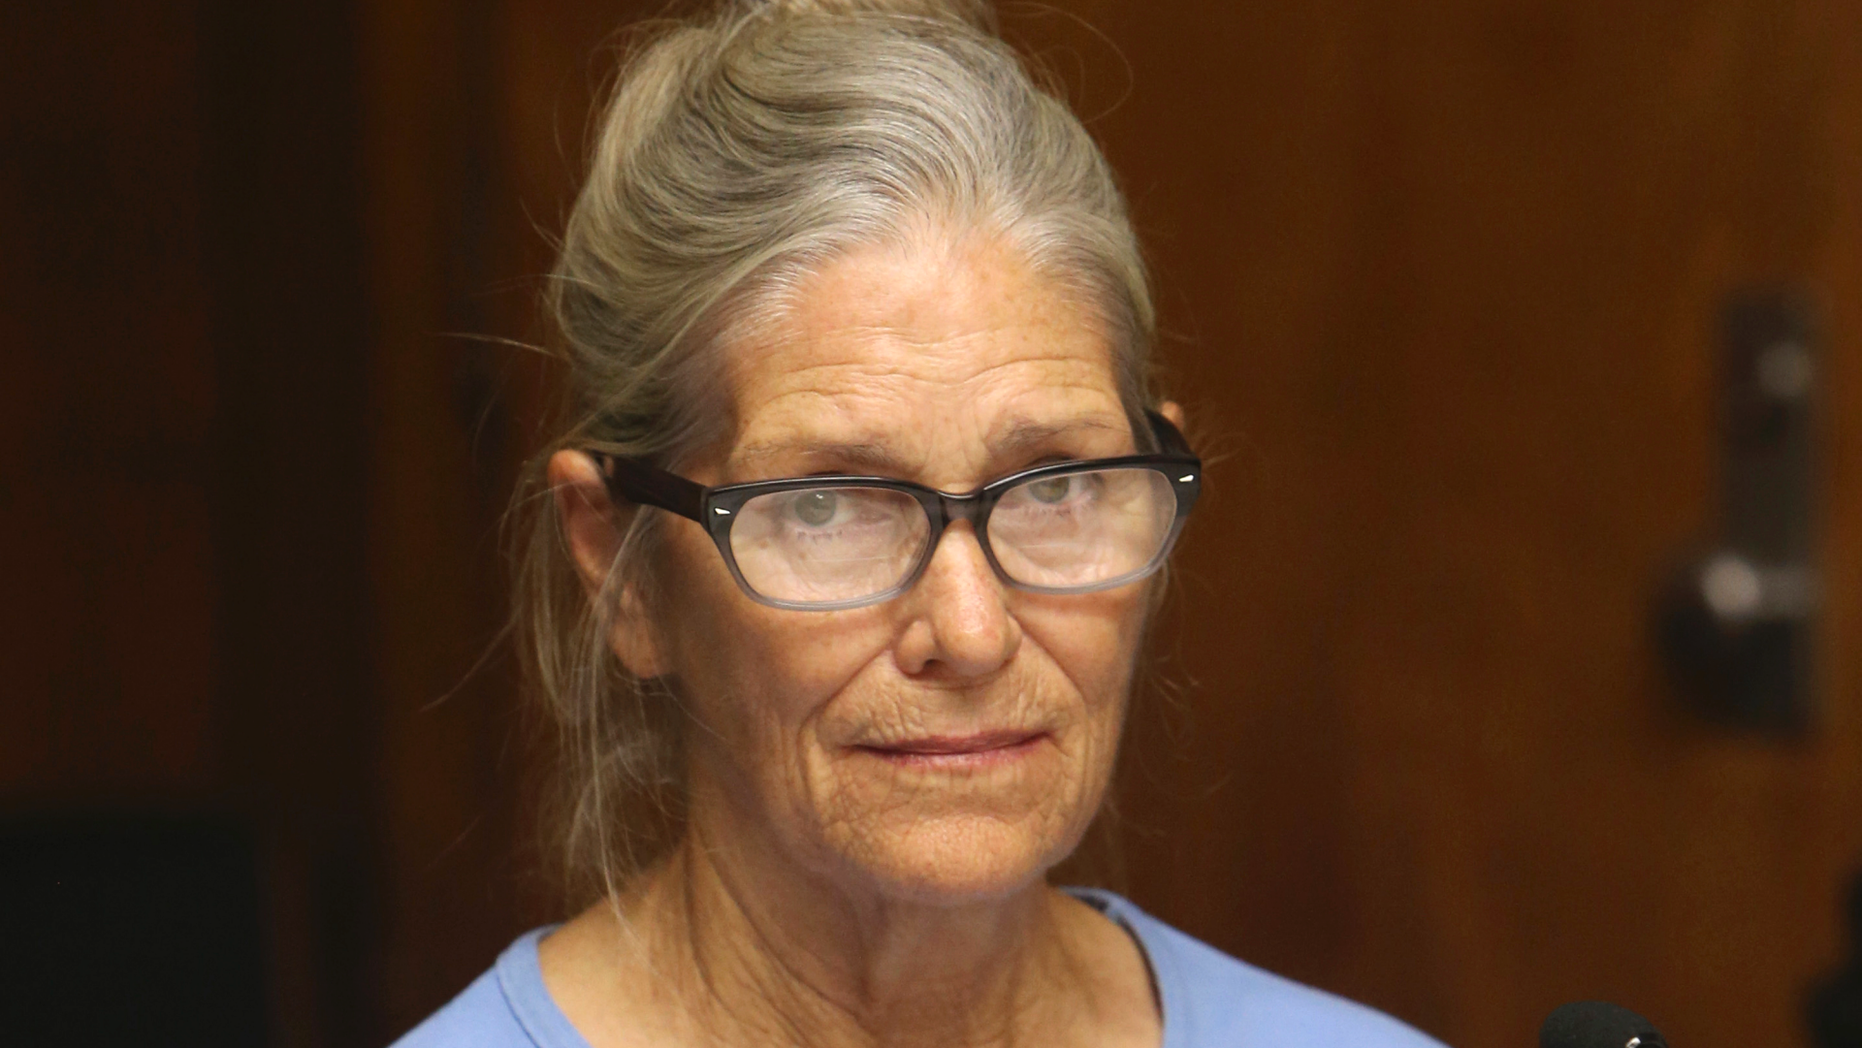 FEATURE - In the archive photo of September 6, 2017, Leslie Van Houten attends her parole hearing at the California Women's Institution in Corona, California. On Monday, June 3, 2019, for the third time, a governor arrested the release of the youngest member of Manson's deadly sect. Newsom said that 69-year-old Van Houten still posed a threat, although she spent close to half a century behind bars and received reports of good behavior and testimonials on his rehabilitation. (Stan Lim / Los Angeles Daily News via AP, Pool, File)